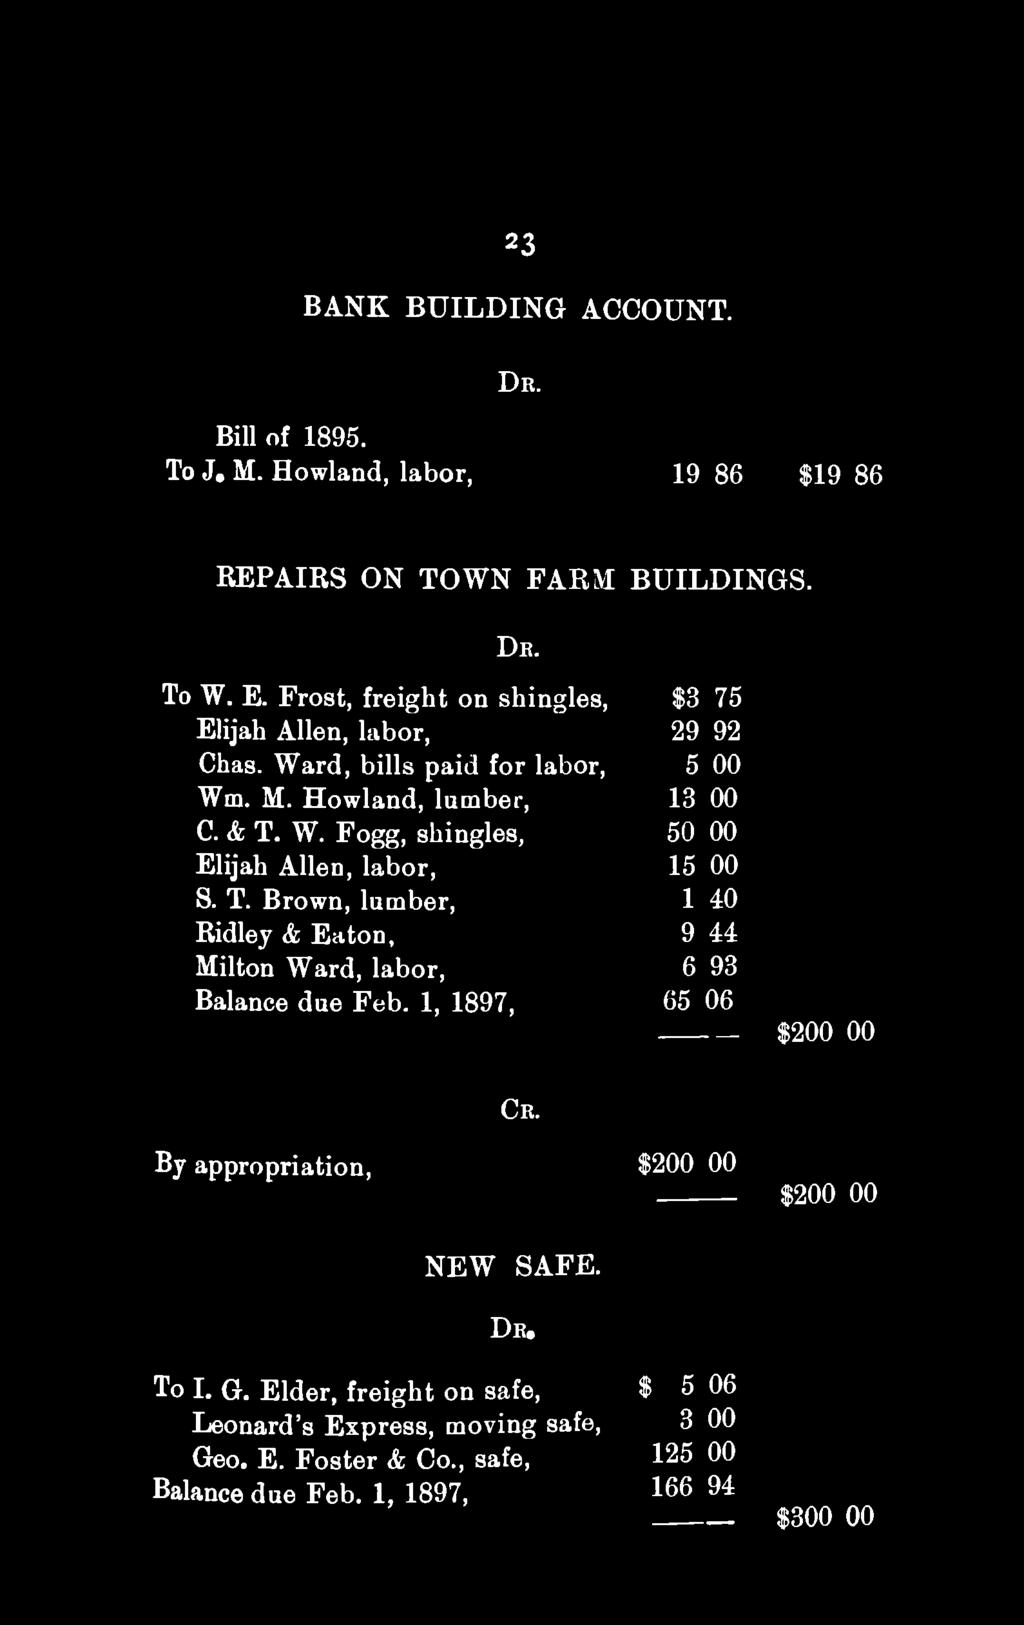 23 BANK BUILDING ACCOUNT. DR. Bill of 1895. To J. M. Howland, labor, 19 86 $19 86 REPAIRS ON TOWN FARM BUILDINGS. DK. To W. E. Frost, freight on shingles, $3 75 Elijah Allen, labor, 29 92 Chas.